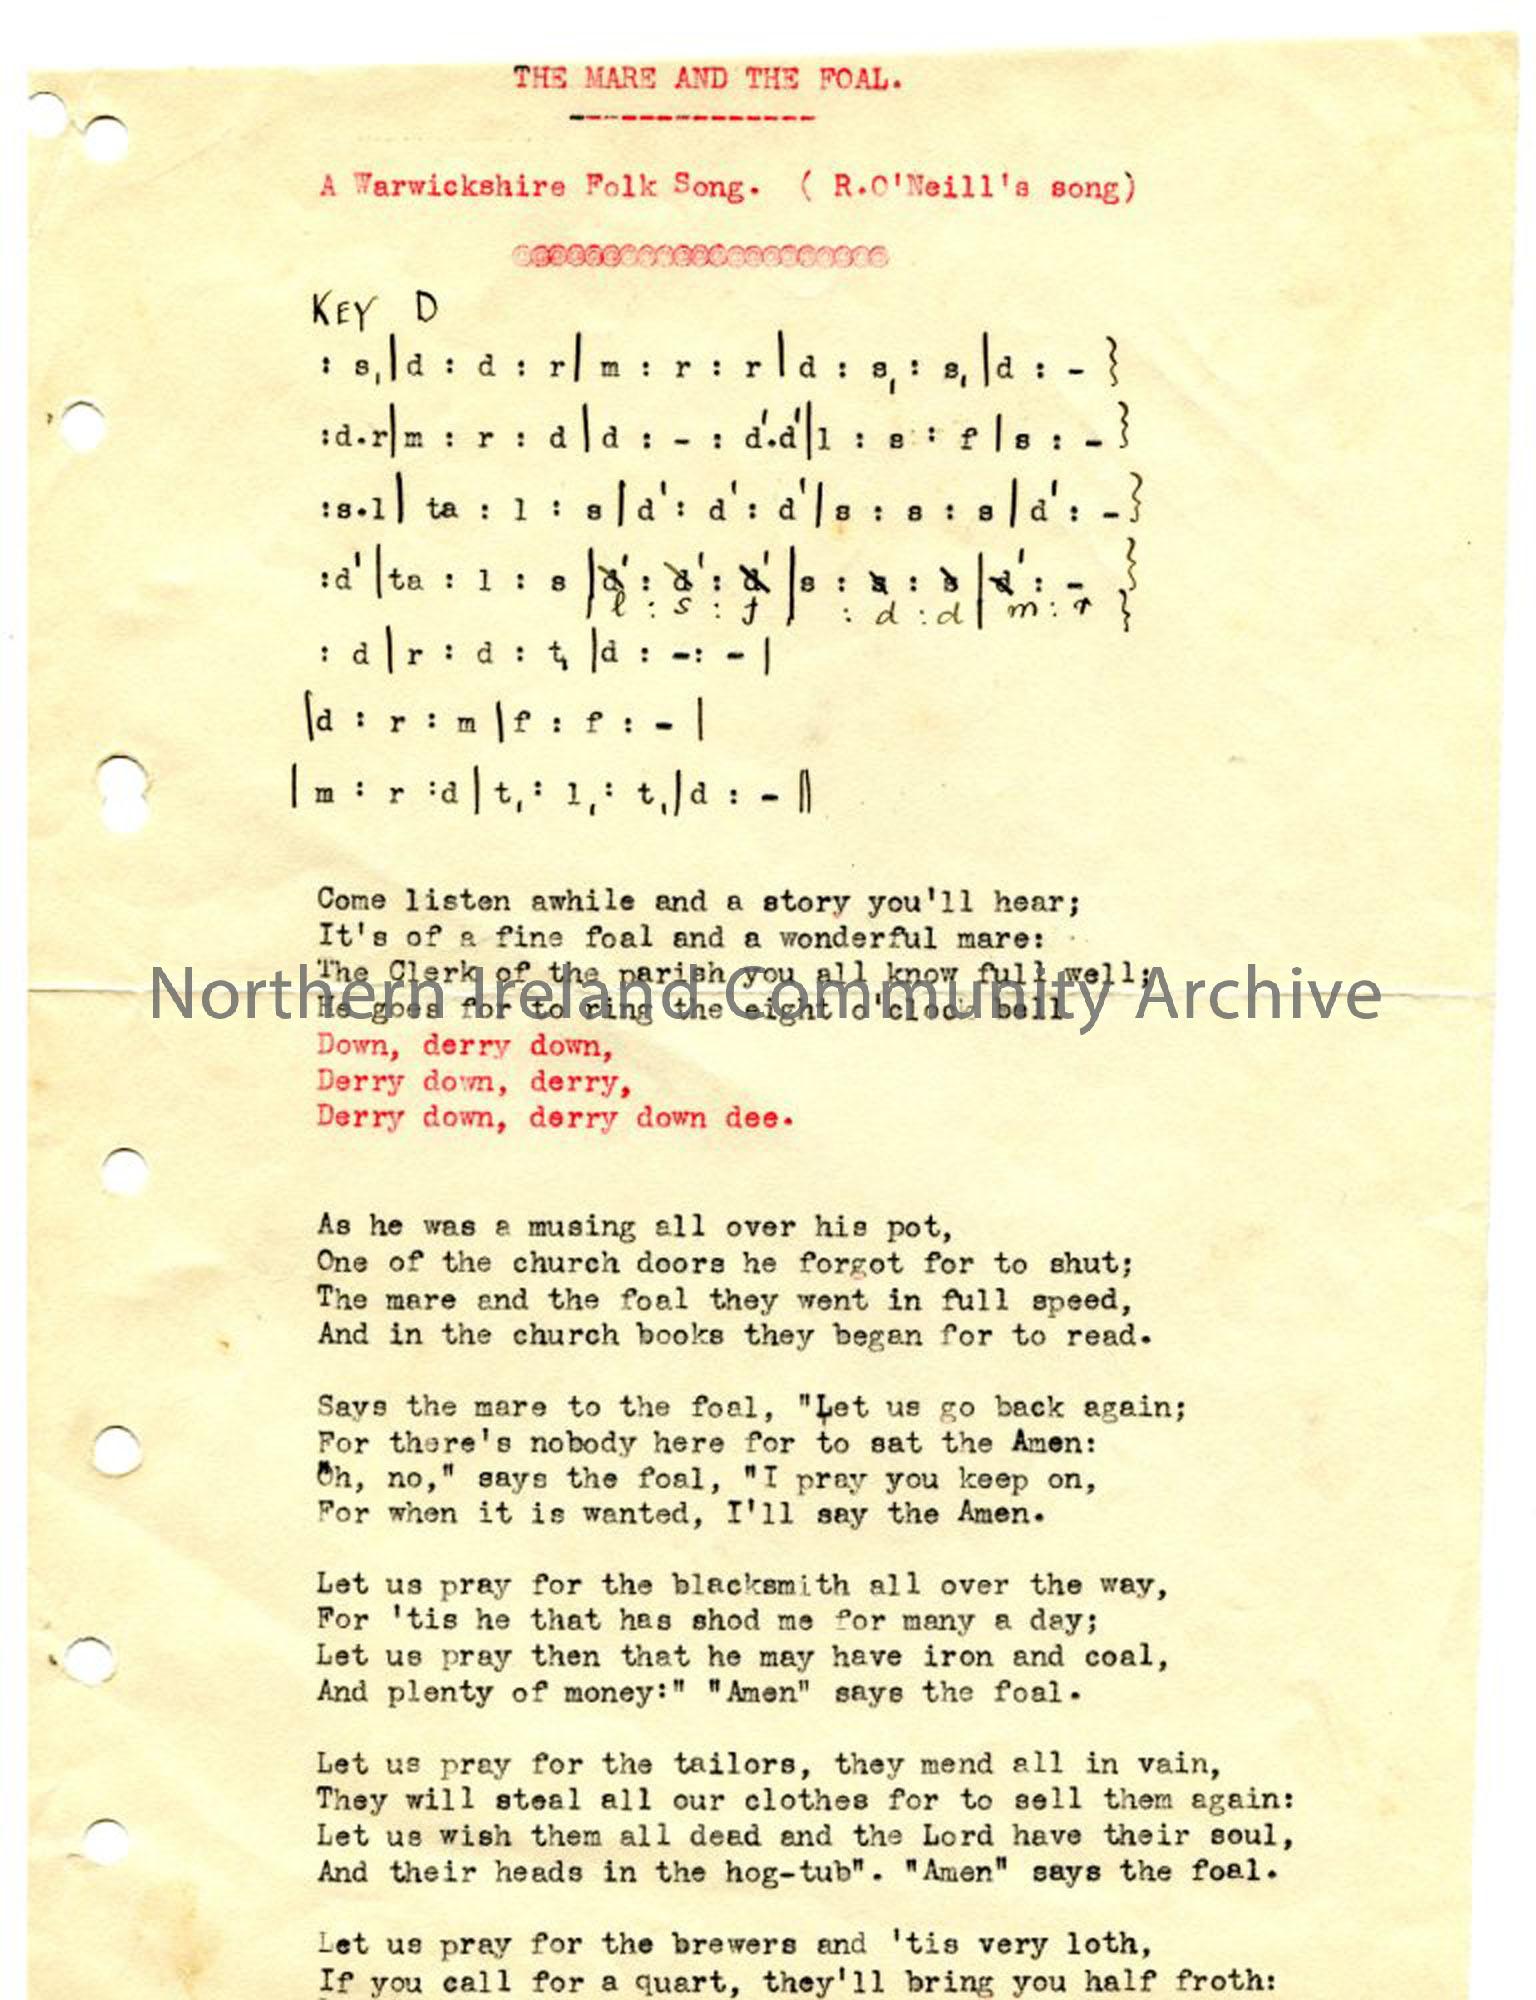 Typed words and tonic sol-fa notation to alternative version of ‘The Mare and The Foal’.